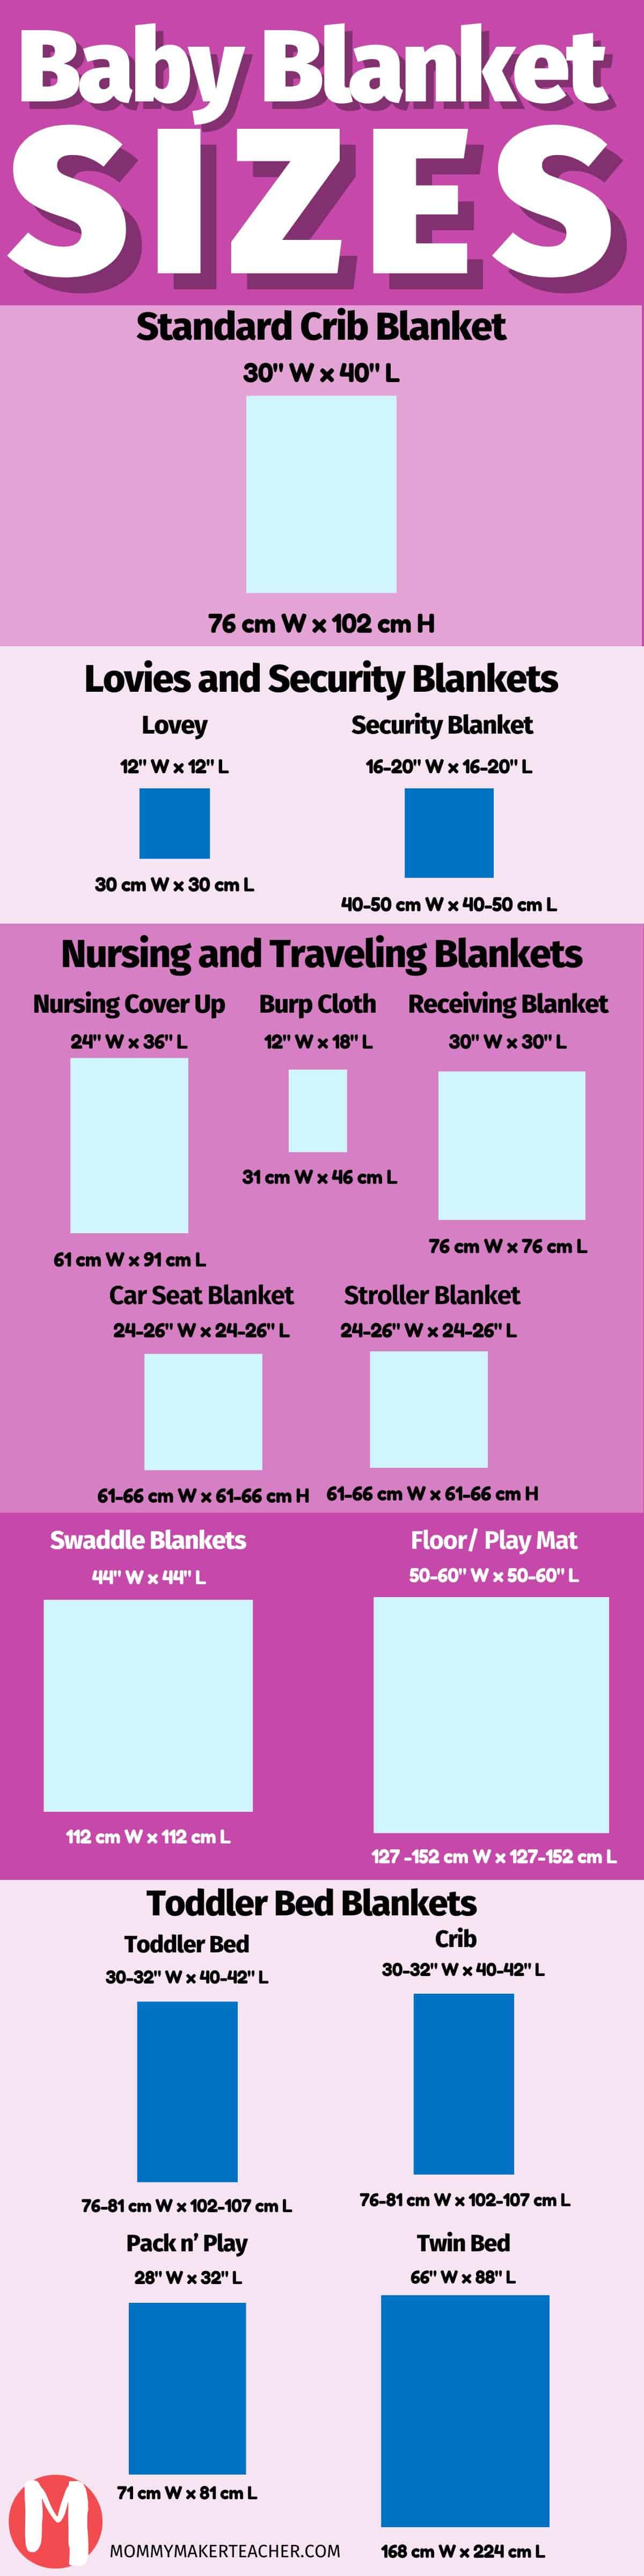 Infographic of different baby blanket sizes by Mommy Maker Teacher